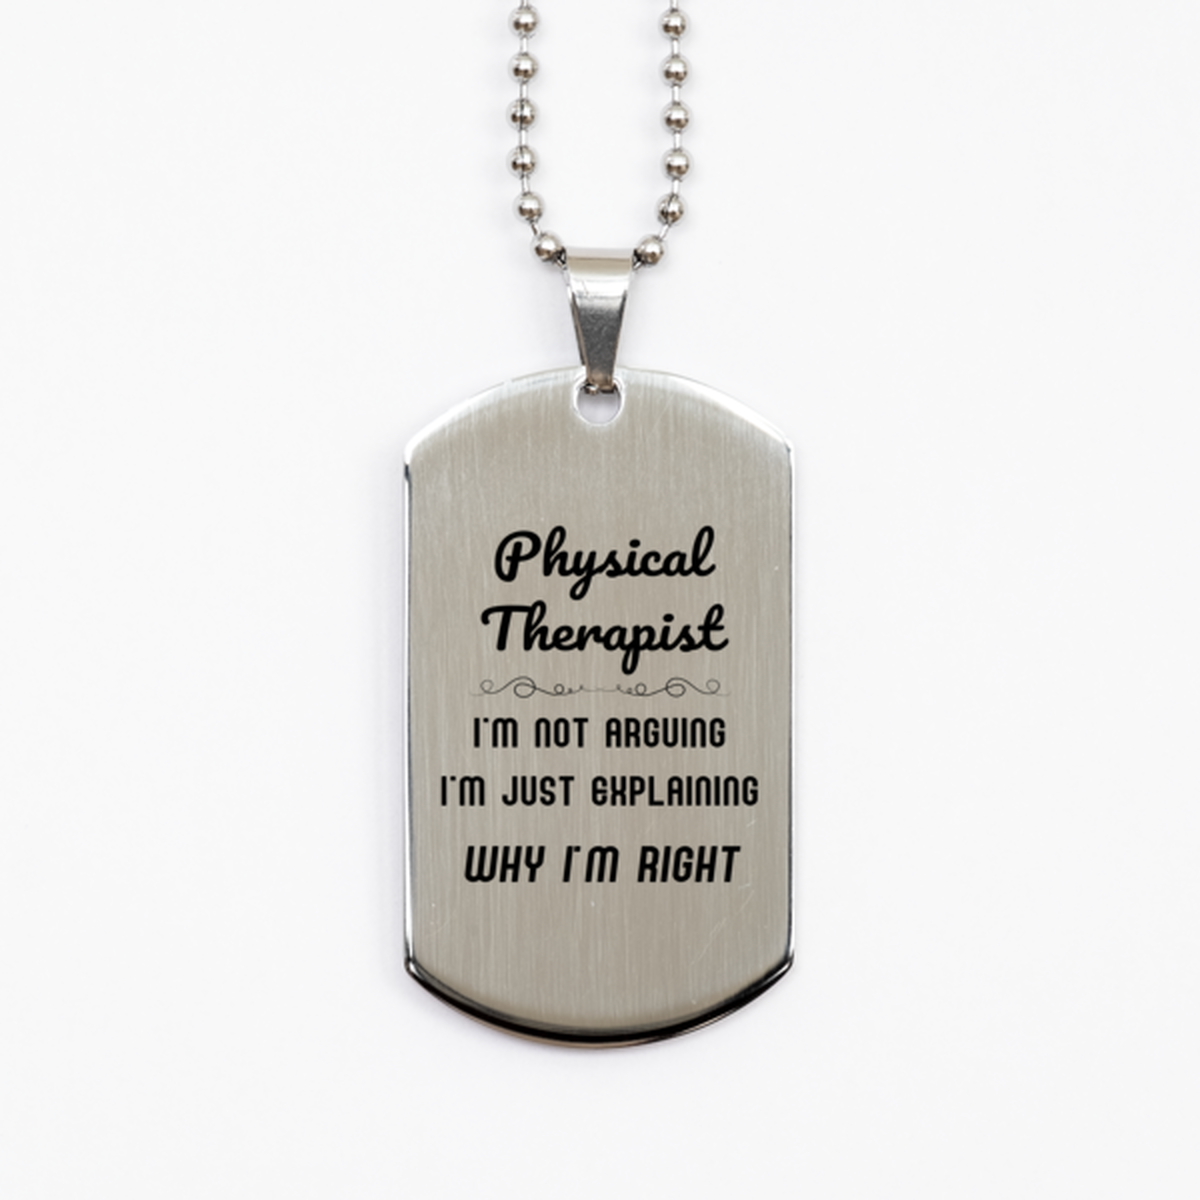 Physical Therapist I'm not Arguing. I'm Just Explaining Why I'm RIGHT Silver Dog Tag, Funny Saying Quote Physical Therapist Gifts For Physical Therapist Graduation Birthday Christmas Gifts for Men Women Coworker